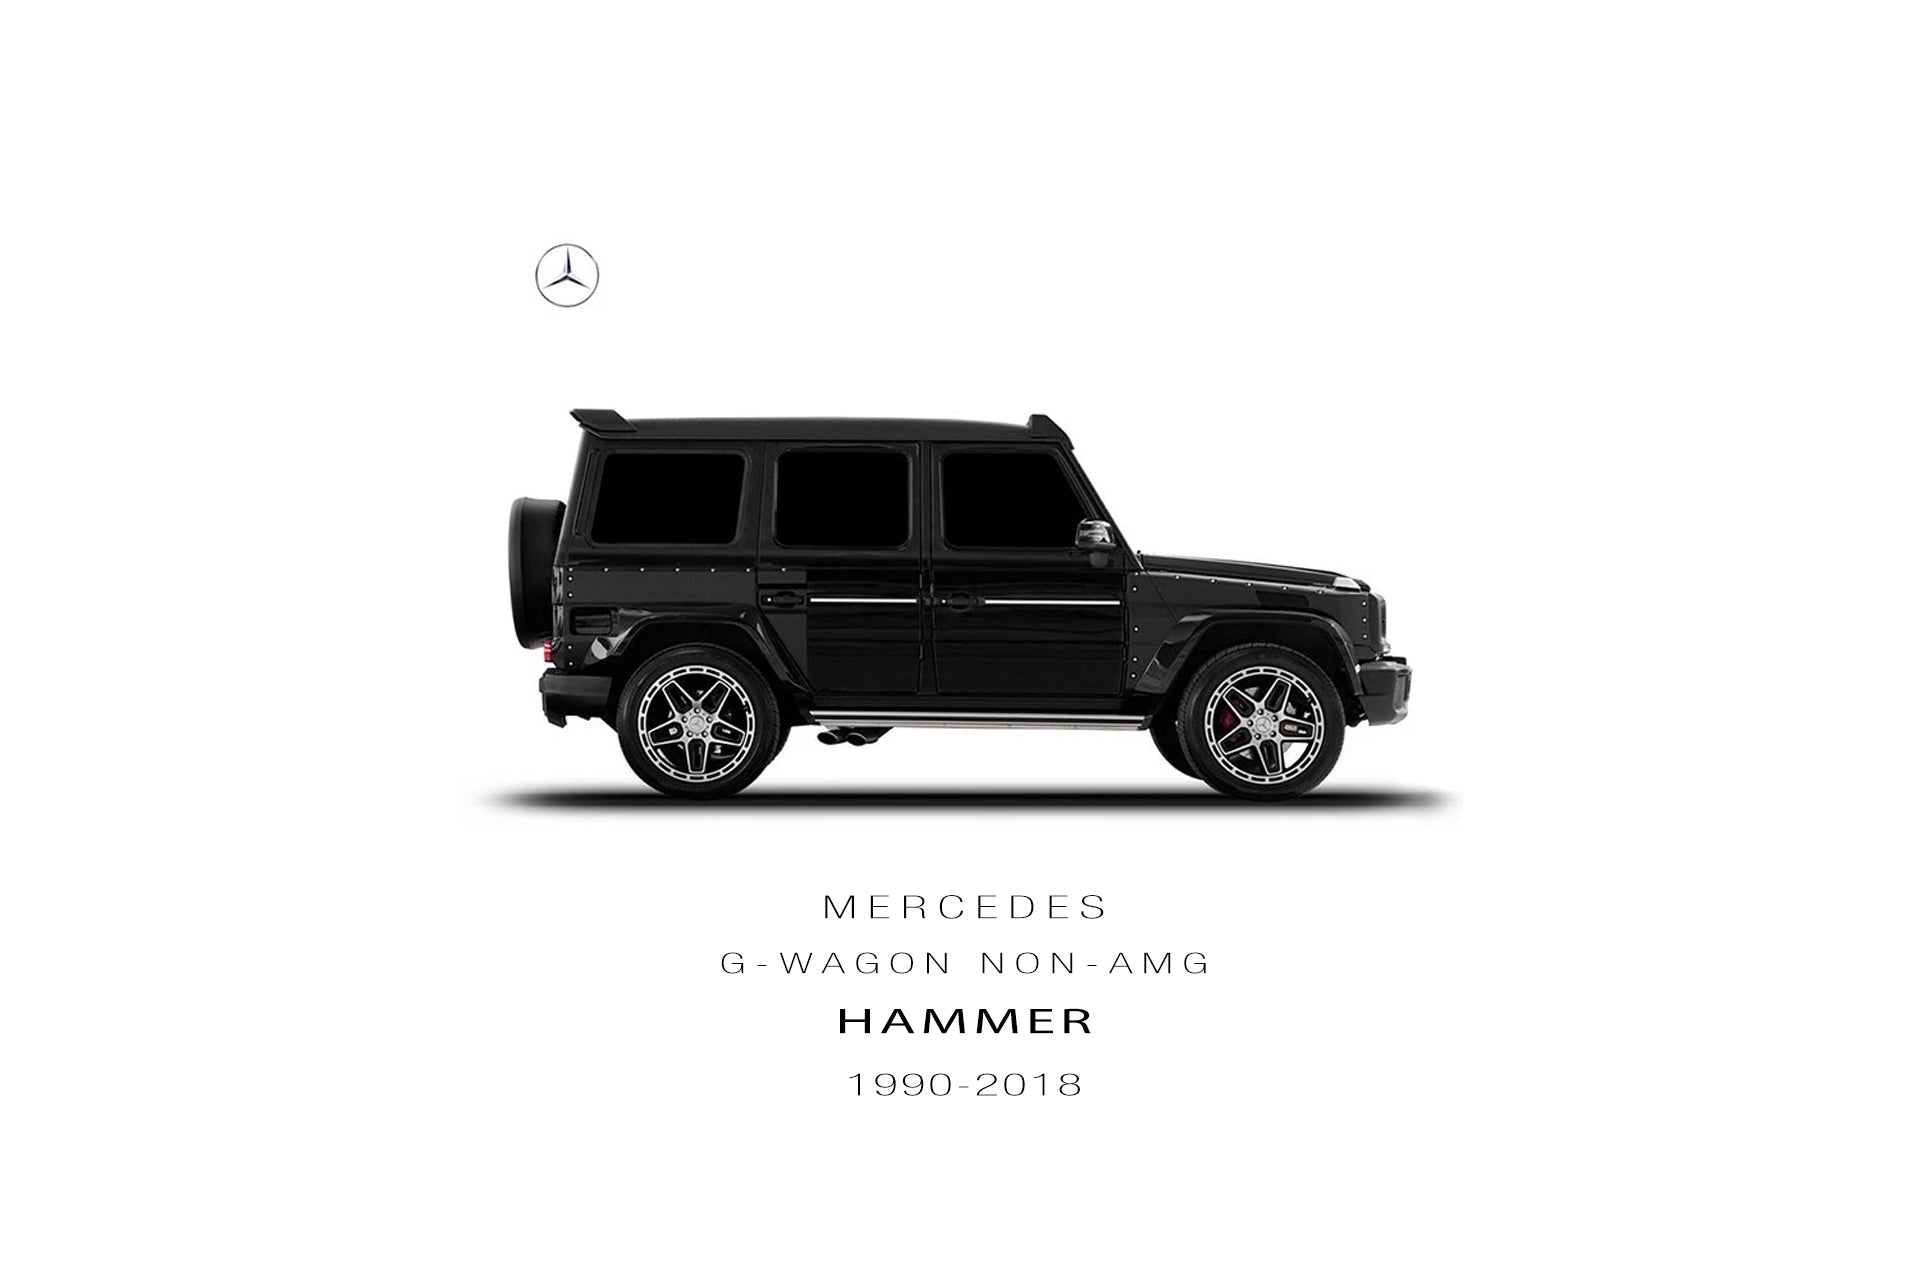 Mercedes G-Wagon (1990-2018) Non-AMG Hammer Tailored Conversion